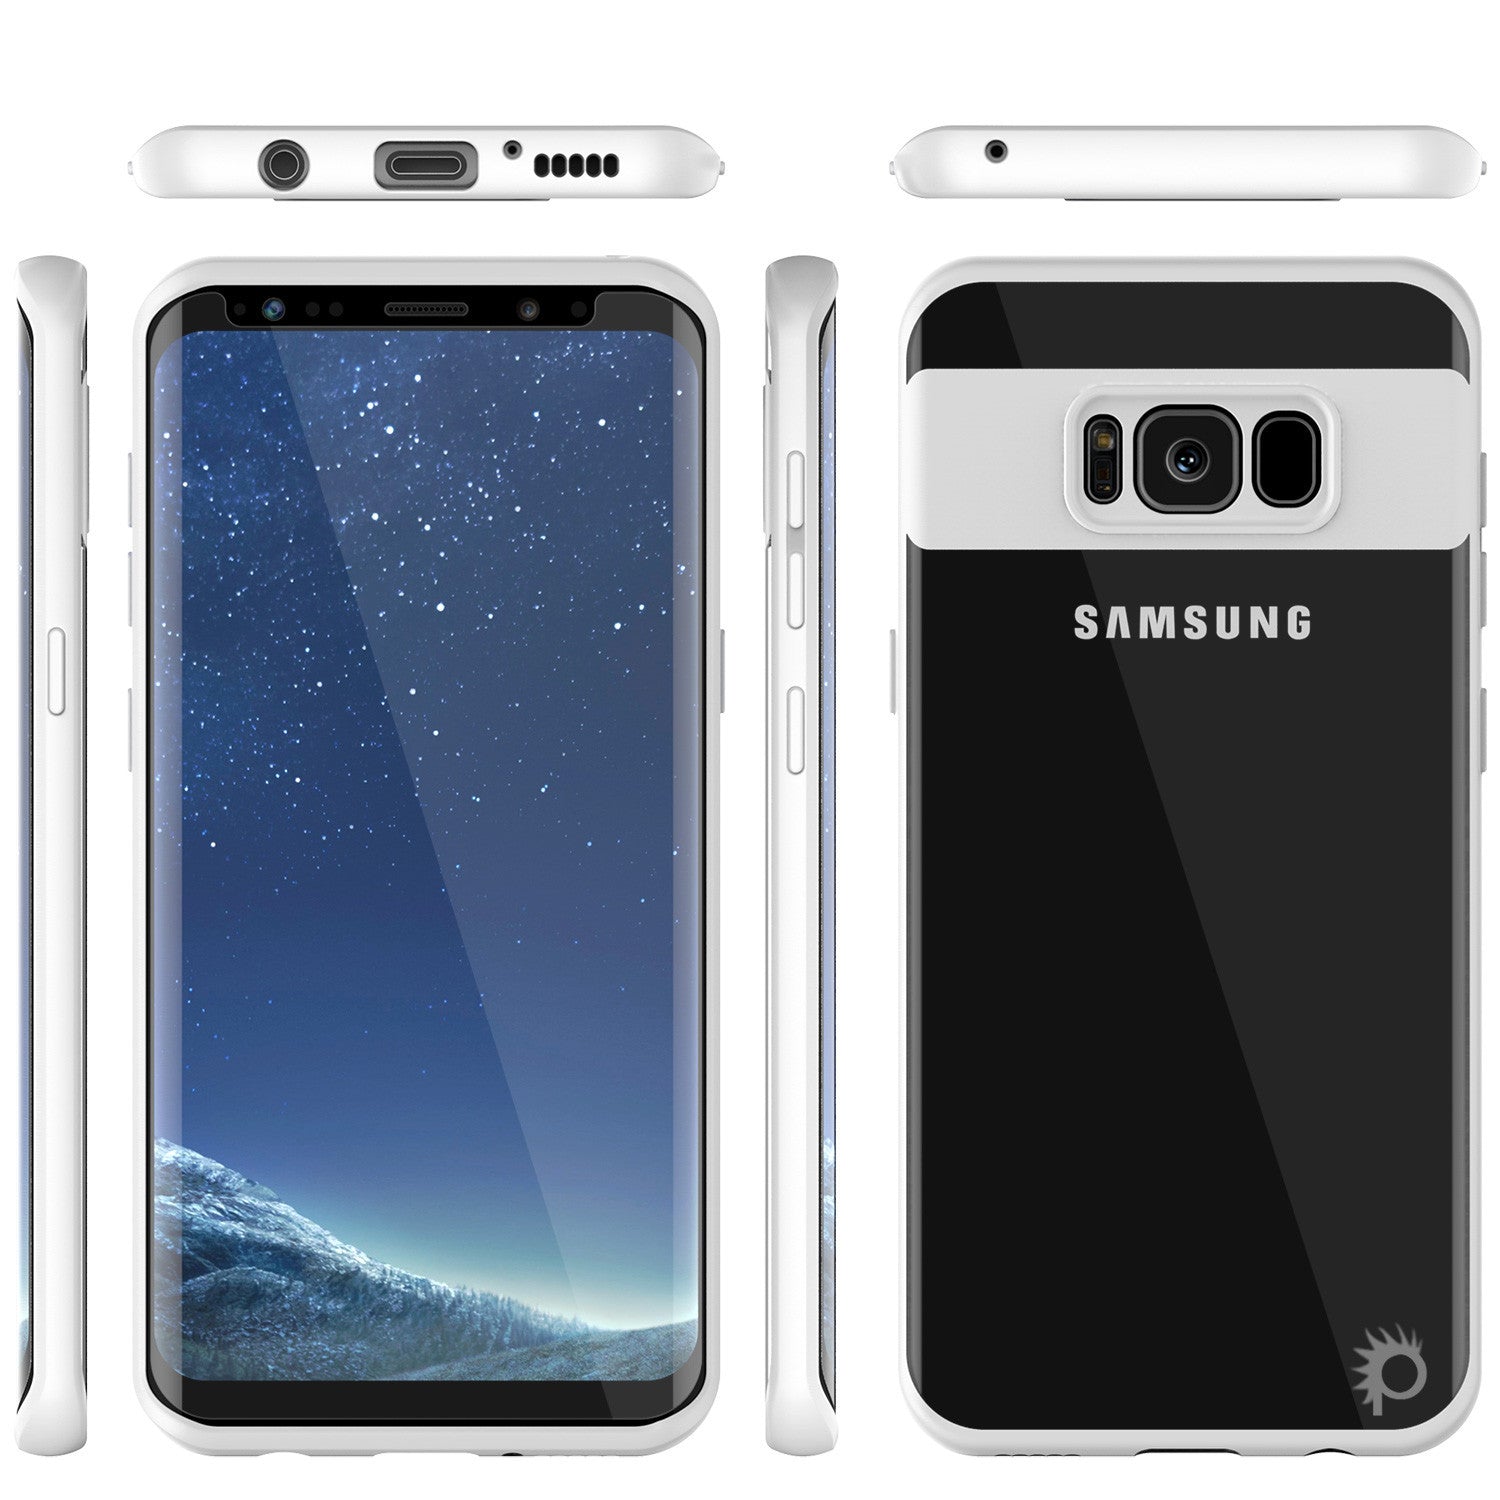 Galaxy S8 Case, Punkcase [MASK Series] [WHITE] Full Body Hybrid Dual Layer TPU Cover W/ Protective PUNKSHIELD Screen Protector